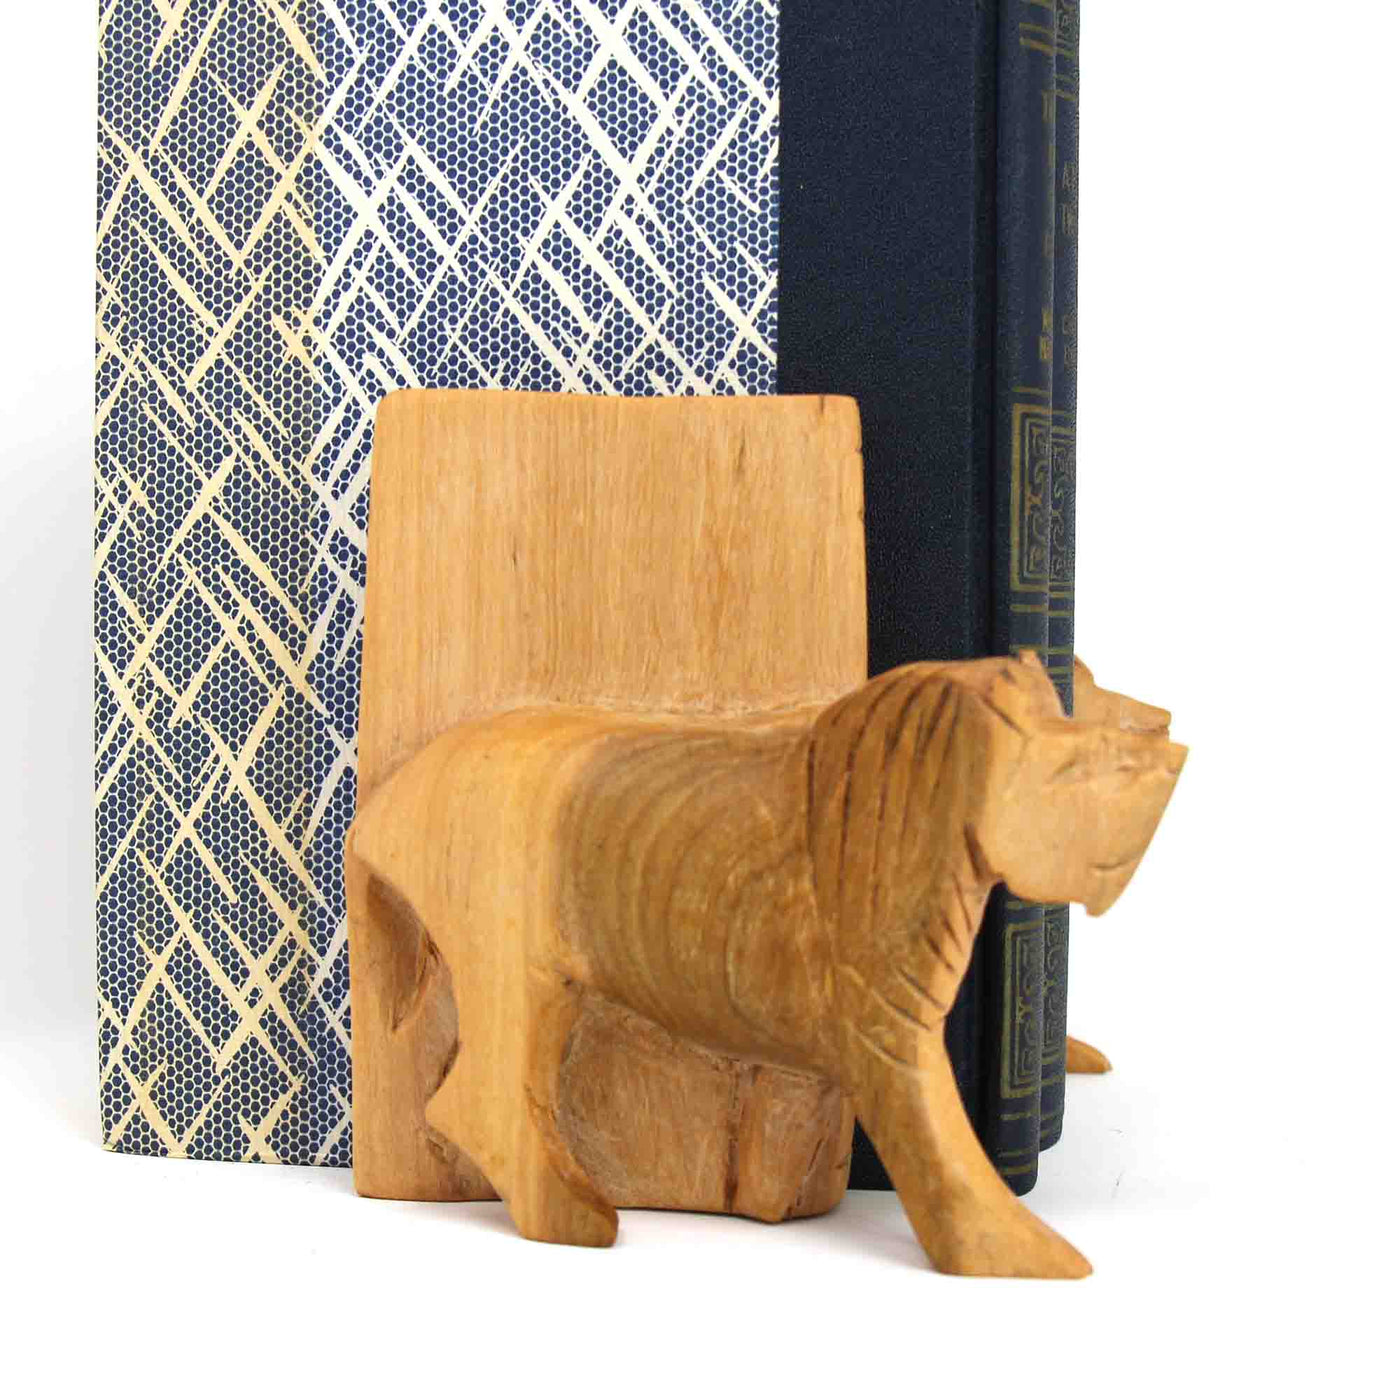 Carved Wood Lion Book Ends, Set of 2 - Yvonne’s 100th Wish Inc